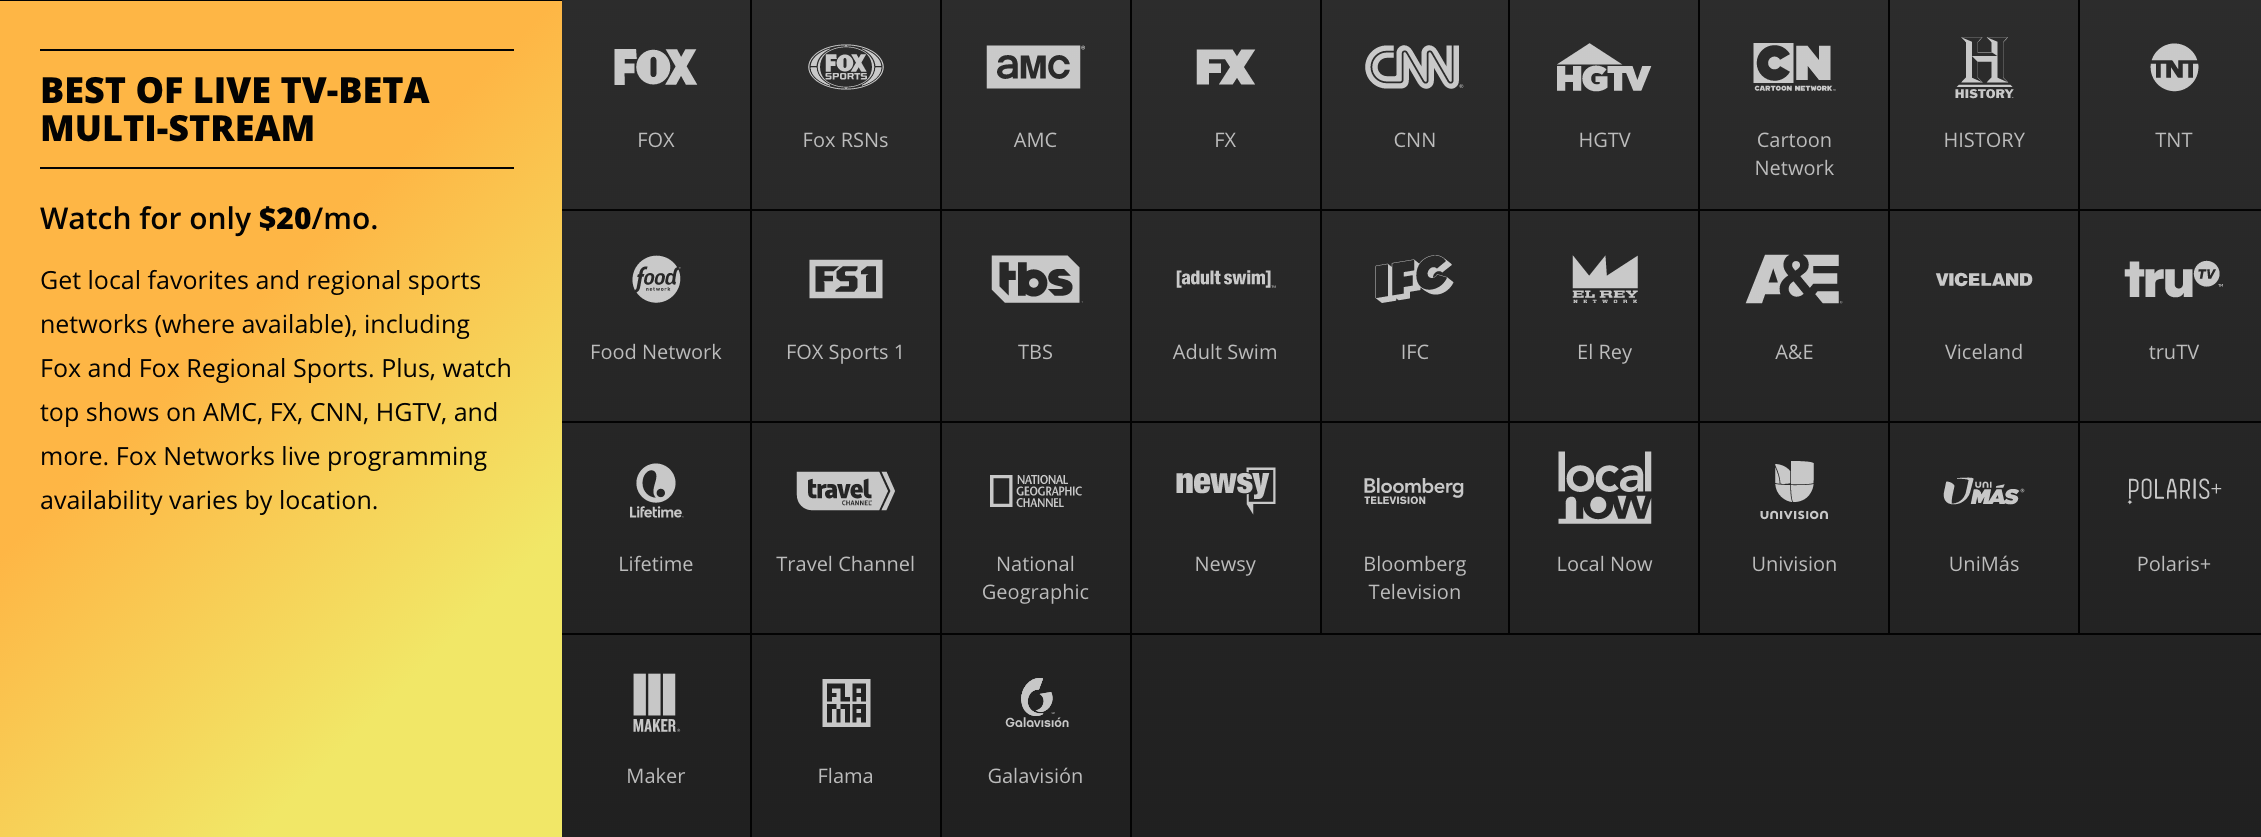 Sling TV Finally Adding Live Network TV, Multi-Stream Support. Is It Worth It?